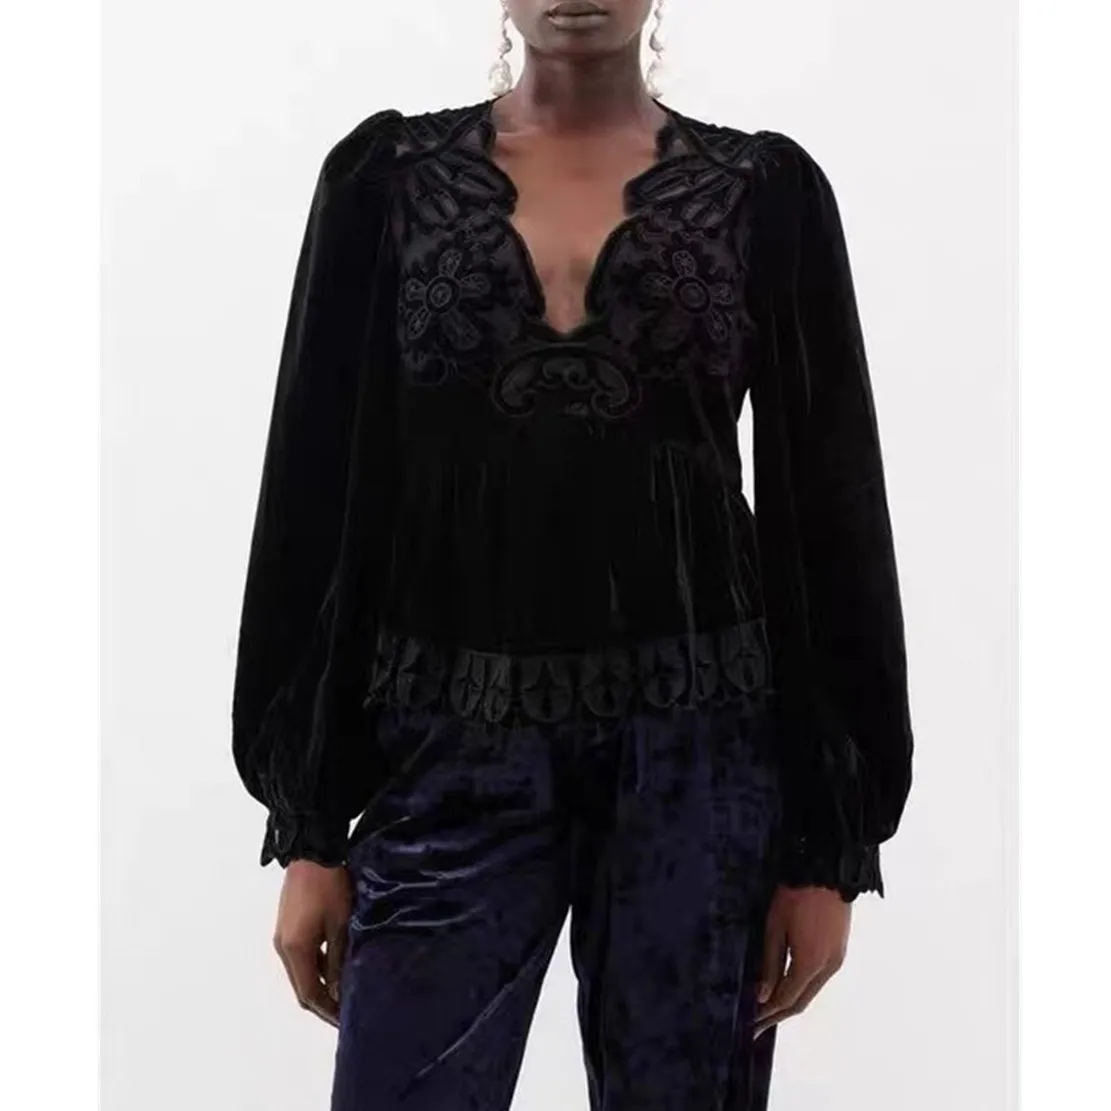 Maxdutti Fashion Spring Blouse Ladies Vintage Silk Mesh Edge Velvet High Quality Embroidered V-neck Bubble Sleeve Shirt Women spring summer new small floral cross knot headband fresh sweet printed wide edge sequin mesh hair accessories